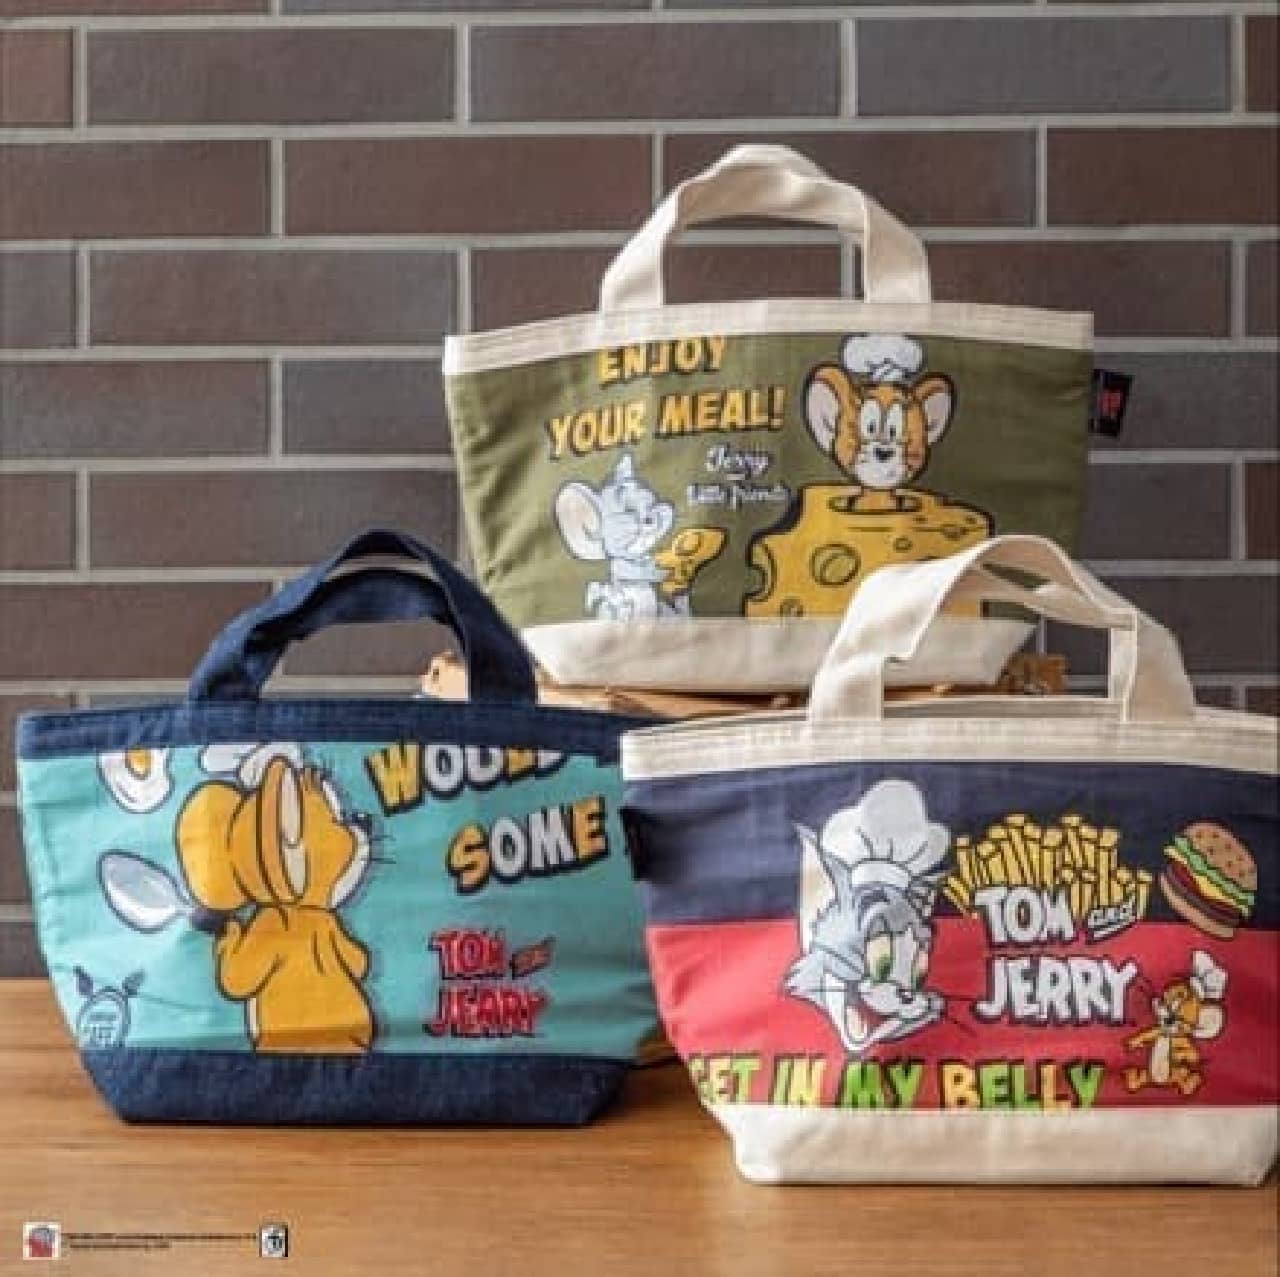 212 "Tom and Jerry" goods from the kitchen store